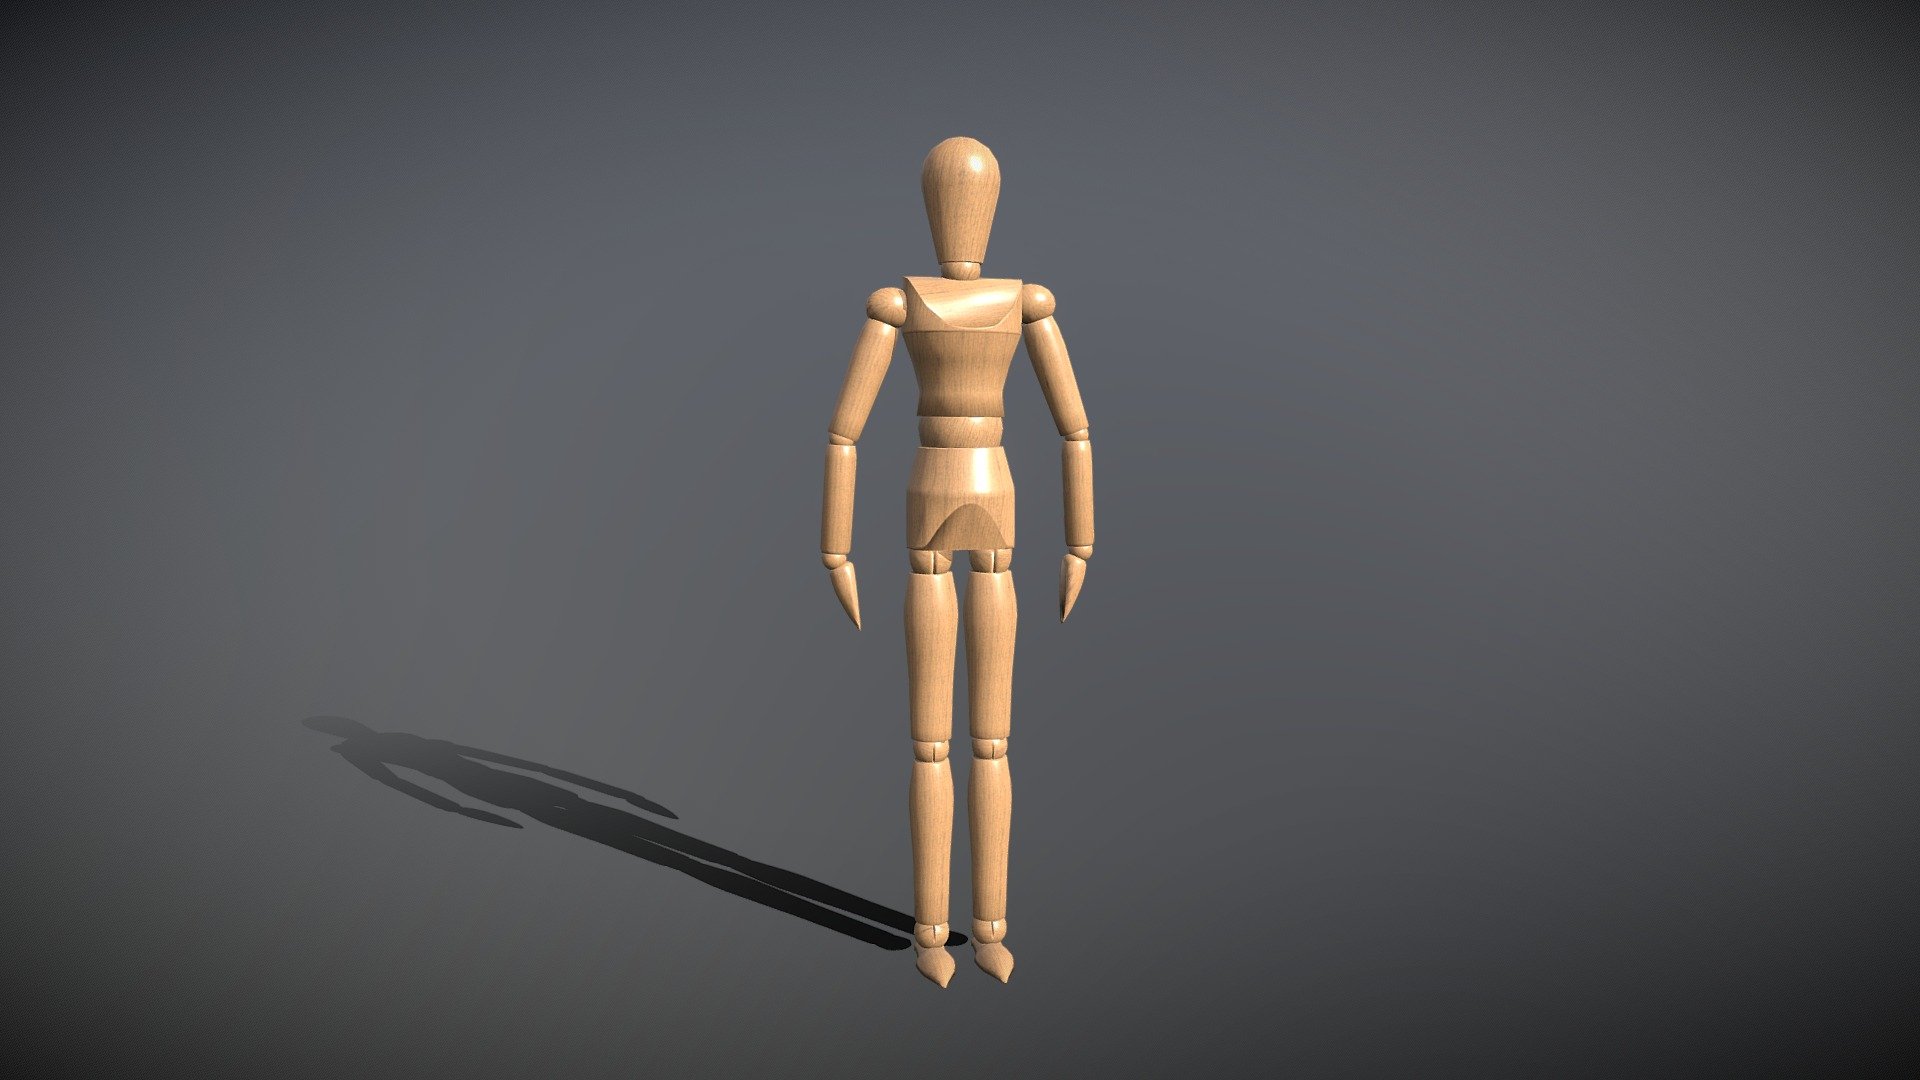 A Wooden artist Mannequin that I have created to test rigging and the different poses that can be achieved with a rigged model 3d model